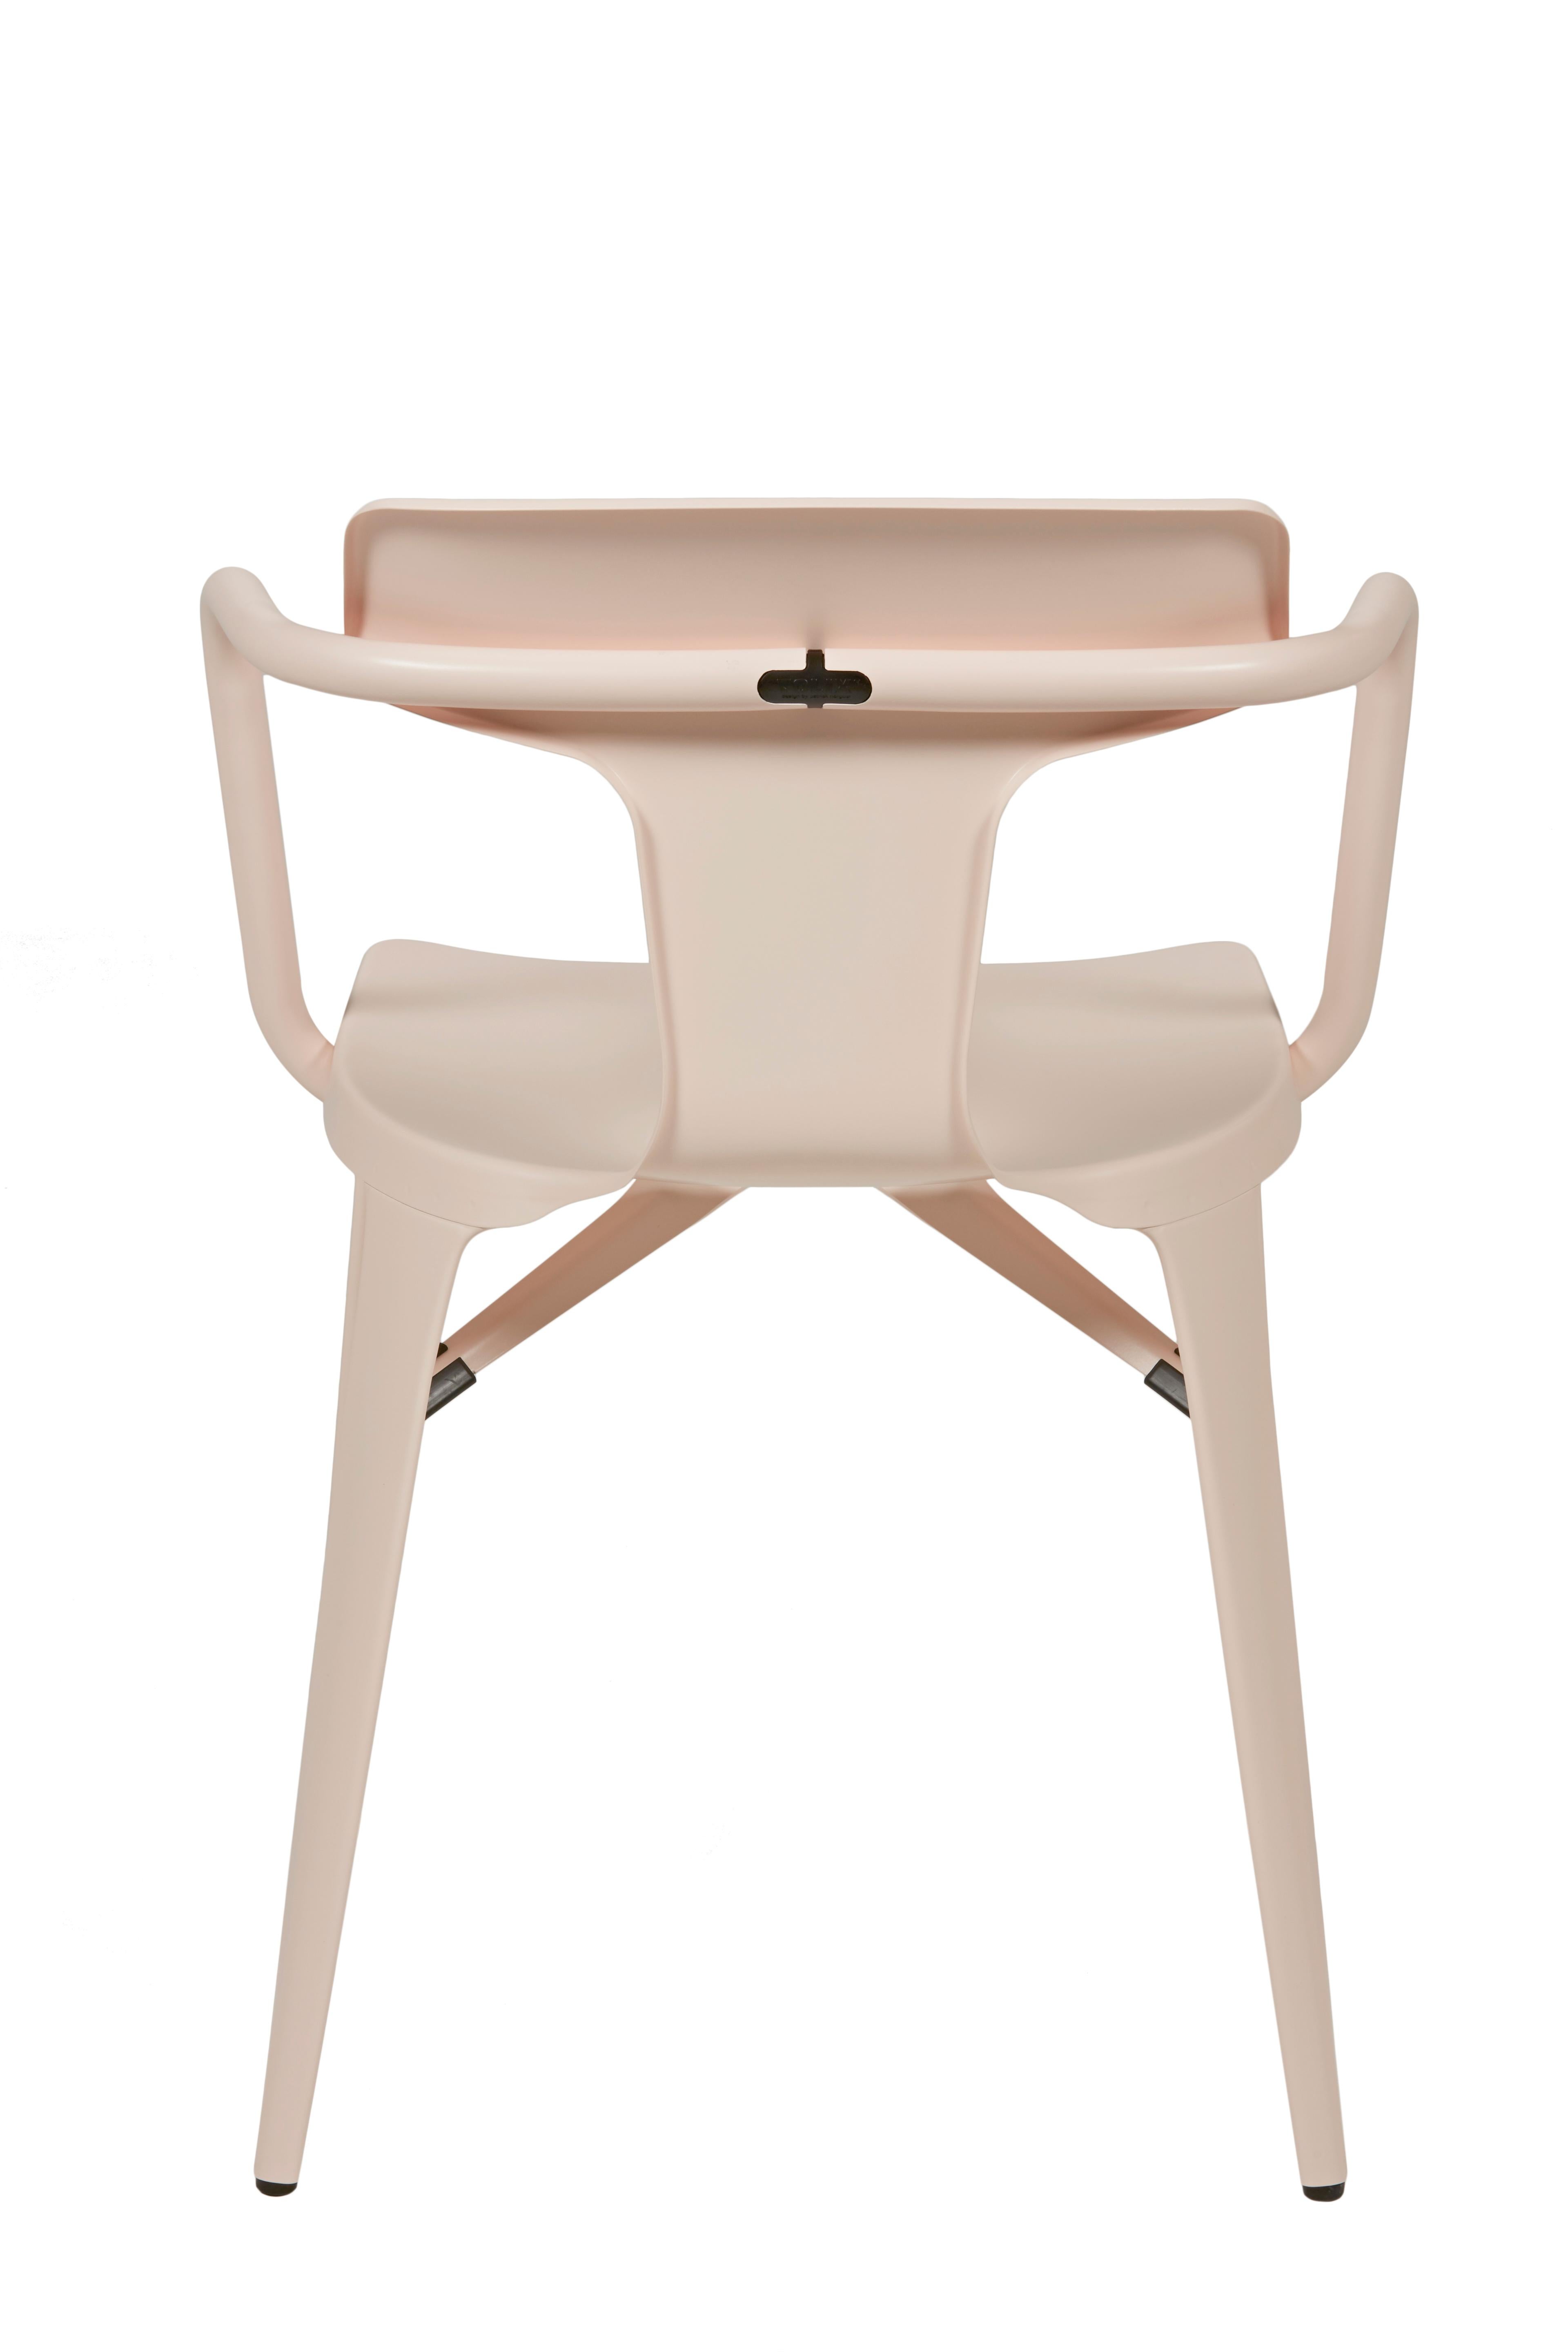 Im Angebot: T14 Chair in Pop Colors by Patrick Norguet and Tolix, Pink (Rose Poudré) 2